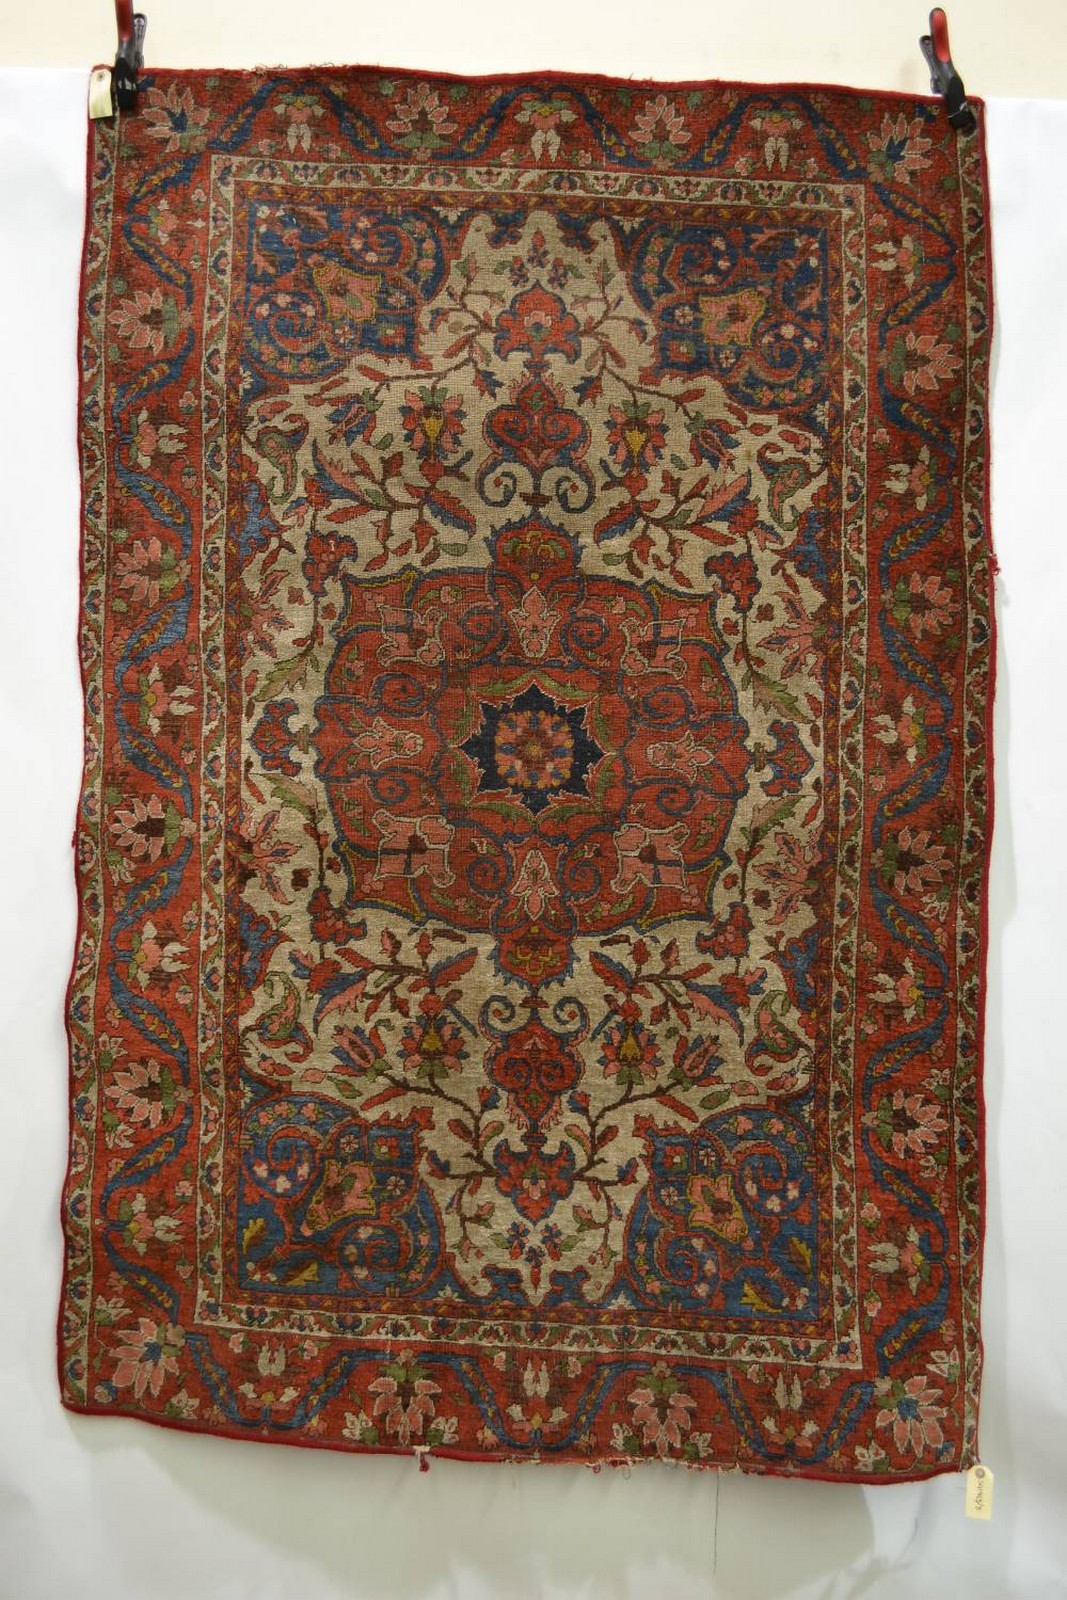 Bakhtiari rug, Chahar Mahal Valley, south west Persia, about 1920, 6ft. 6in. x 4ft. 4in. 1.98m. x